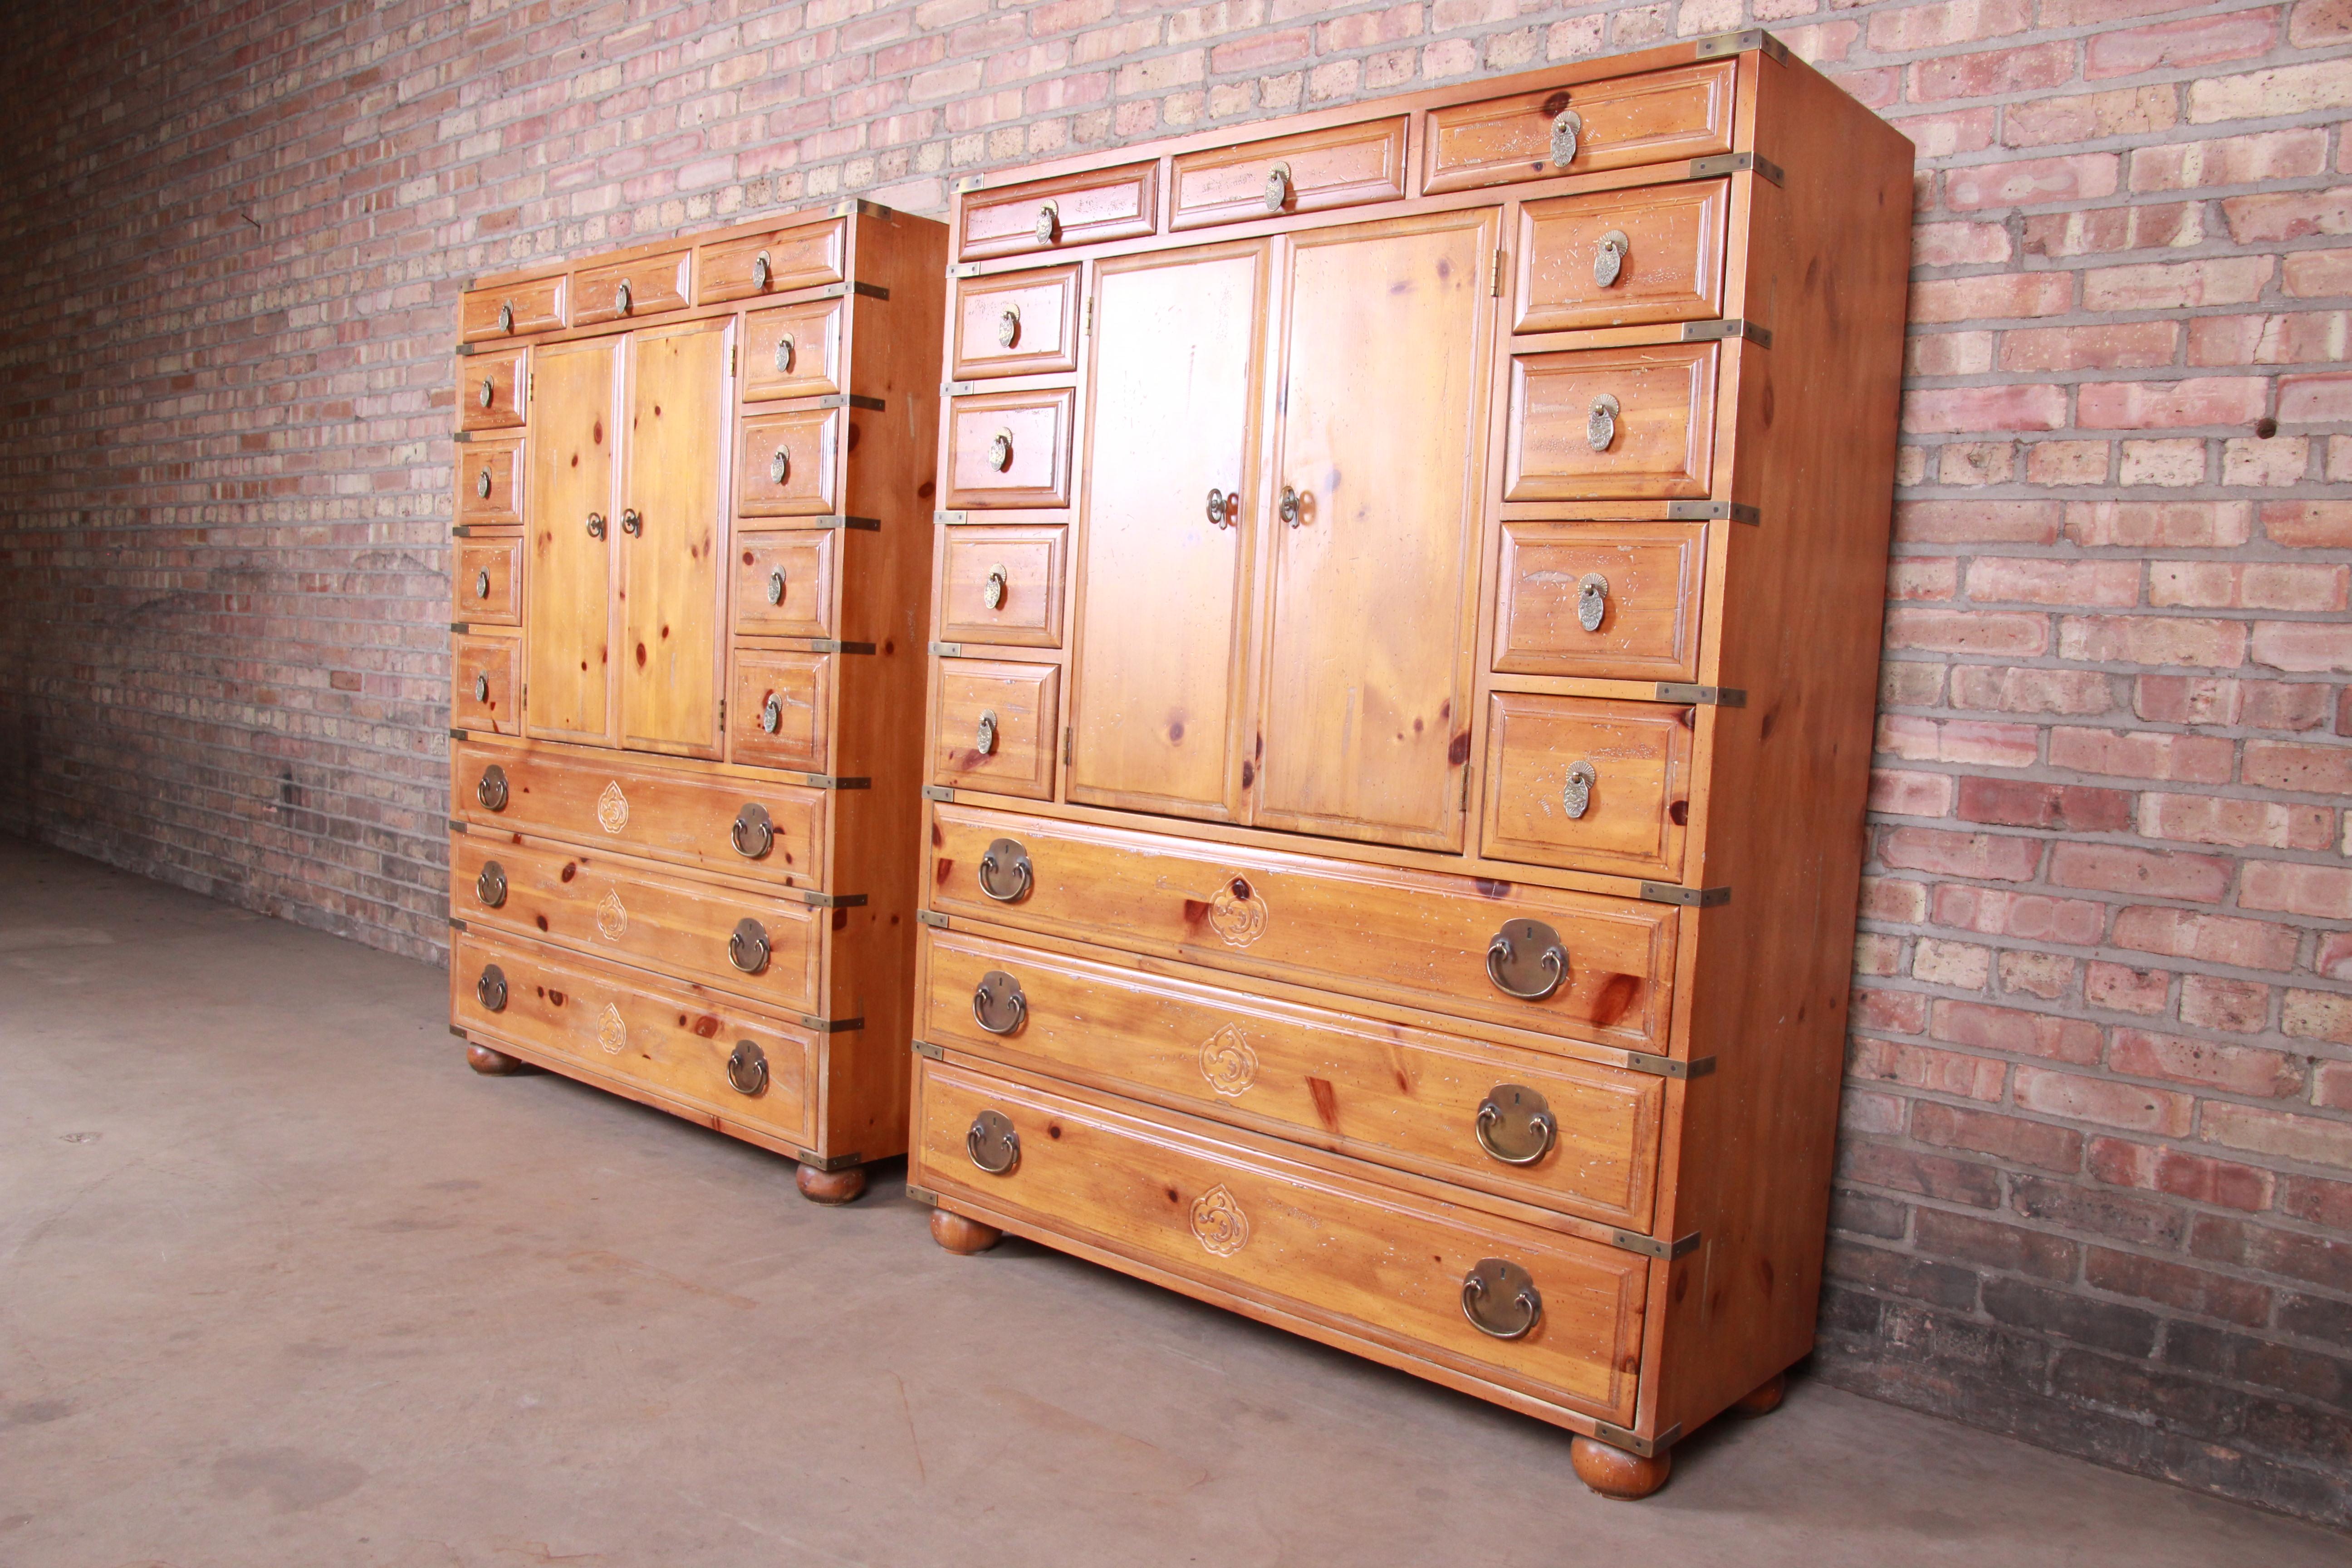 Anglo-Japanese Henredon Solid Pine 14-Drawer Japanese Tansu Chests of Drawers, Pair